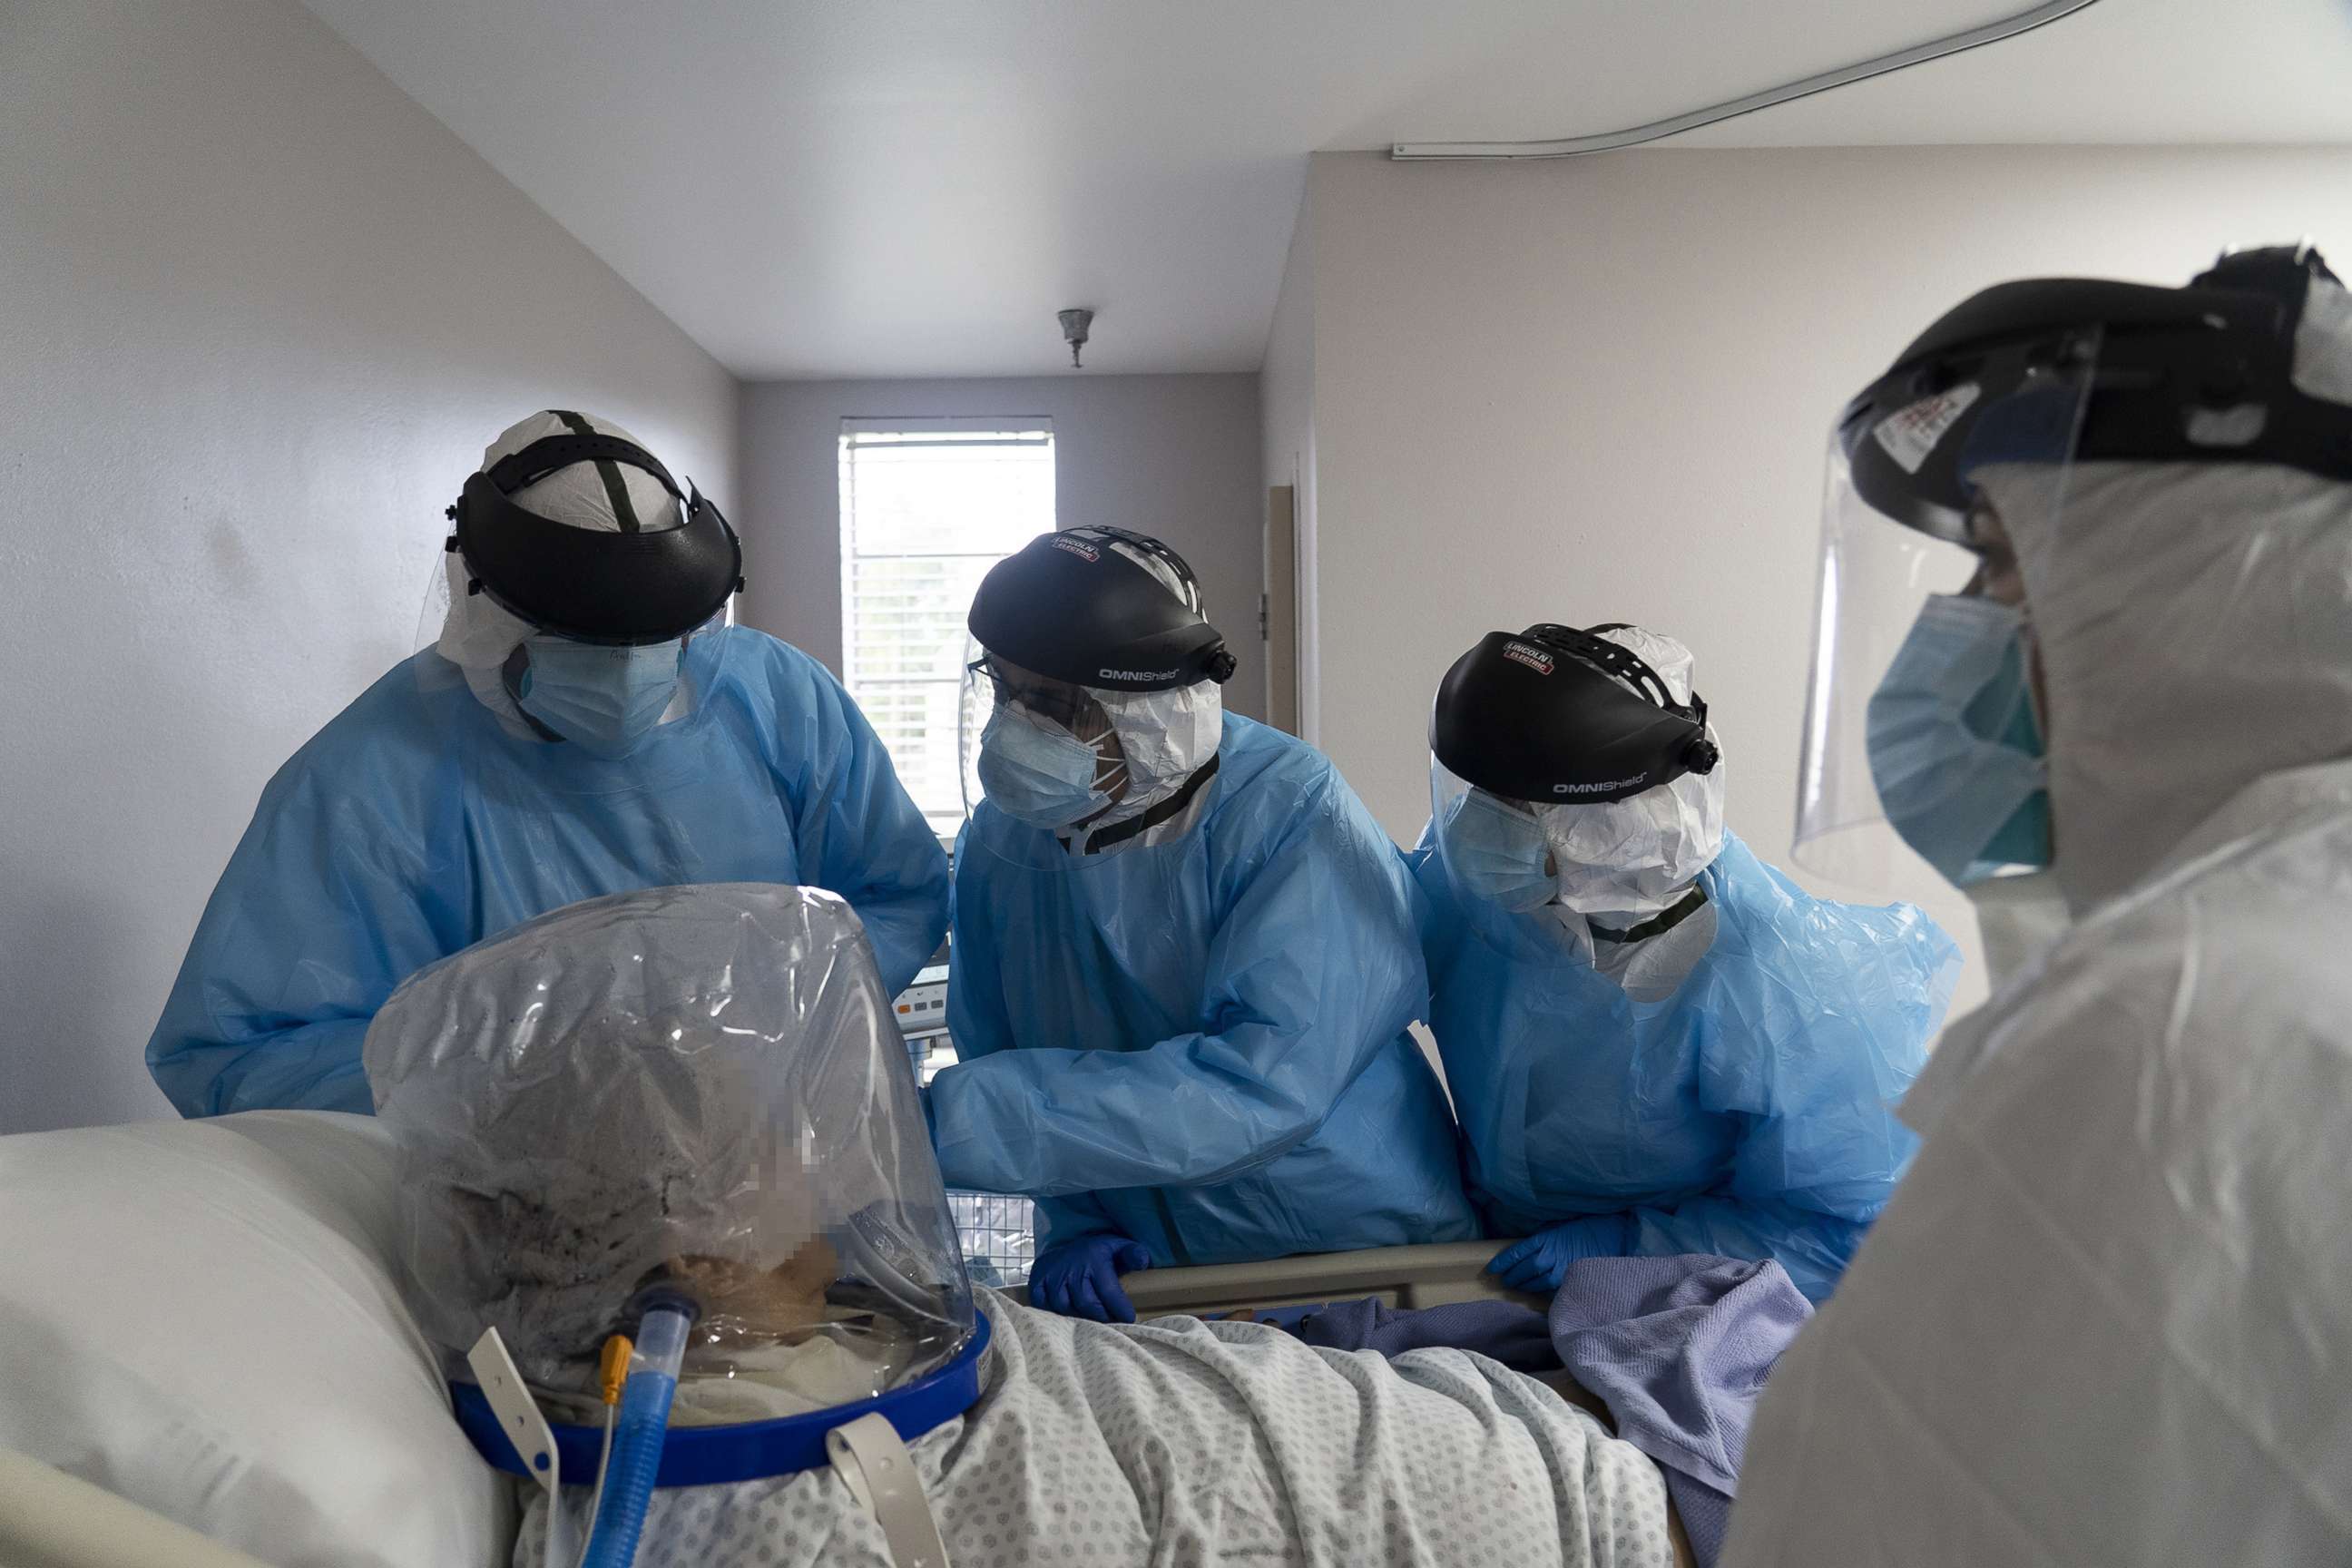 PHOTO: In this July 28, 2020, file photo, members of the medical staff treat a patient who is wearing a helmet-based ventilator in the COVID-19 intensive care unit at the United Memorial Medical Center in Houston.